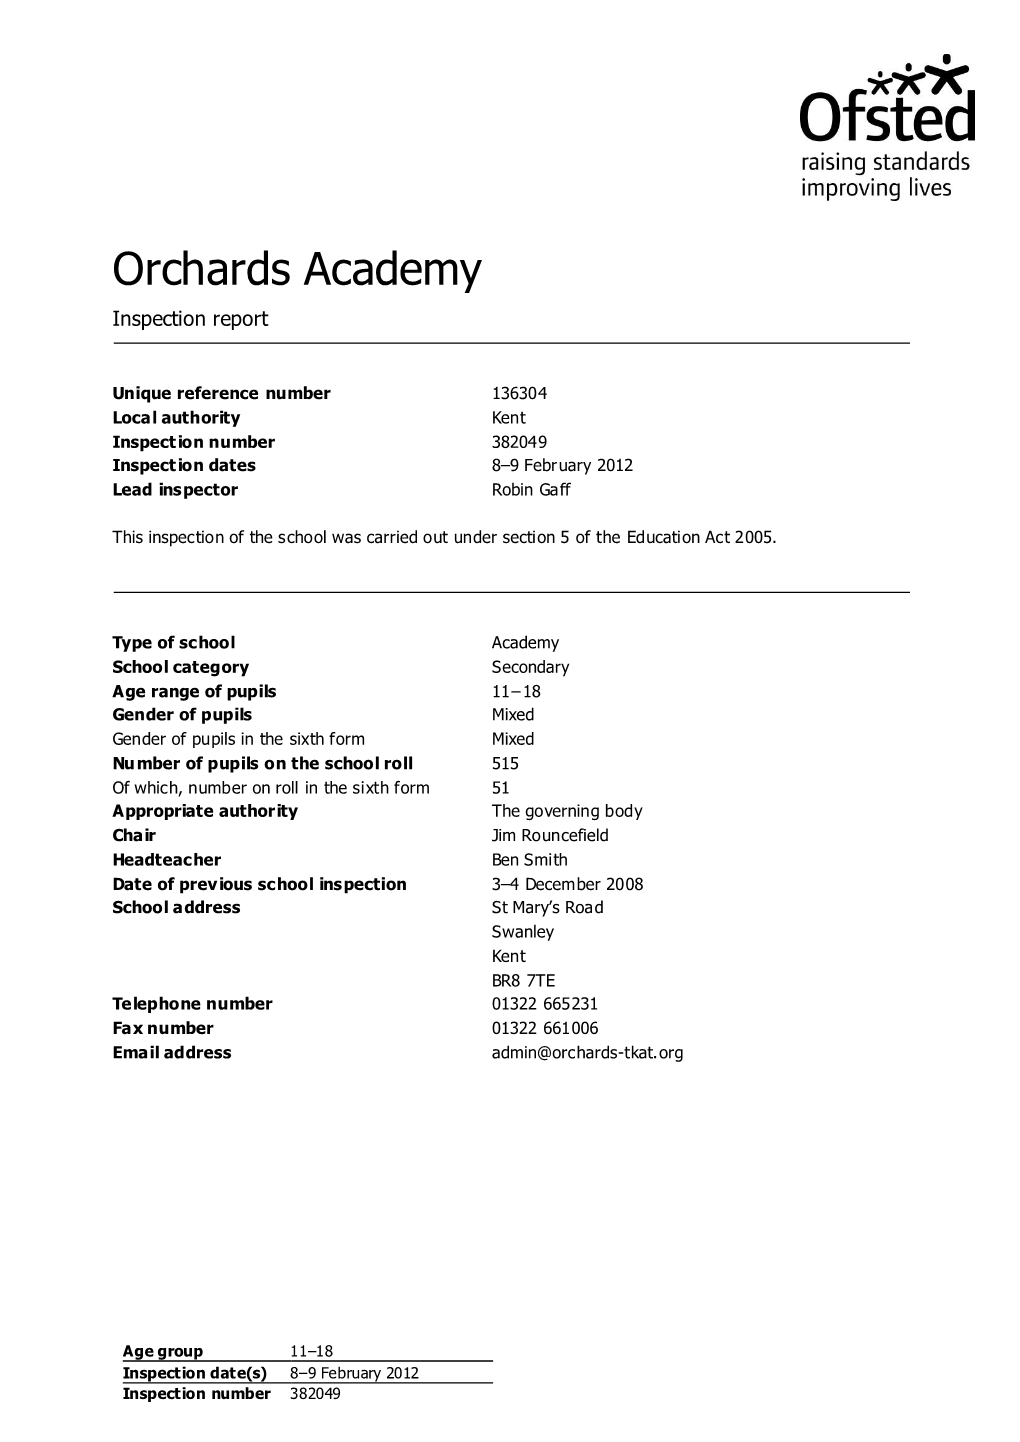 Orchards Academy Inspection Report